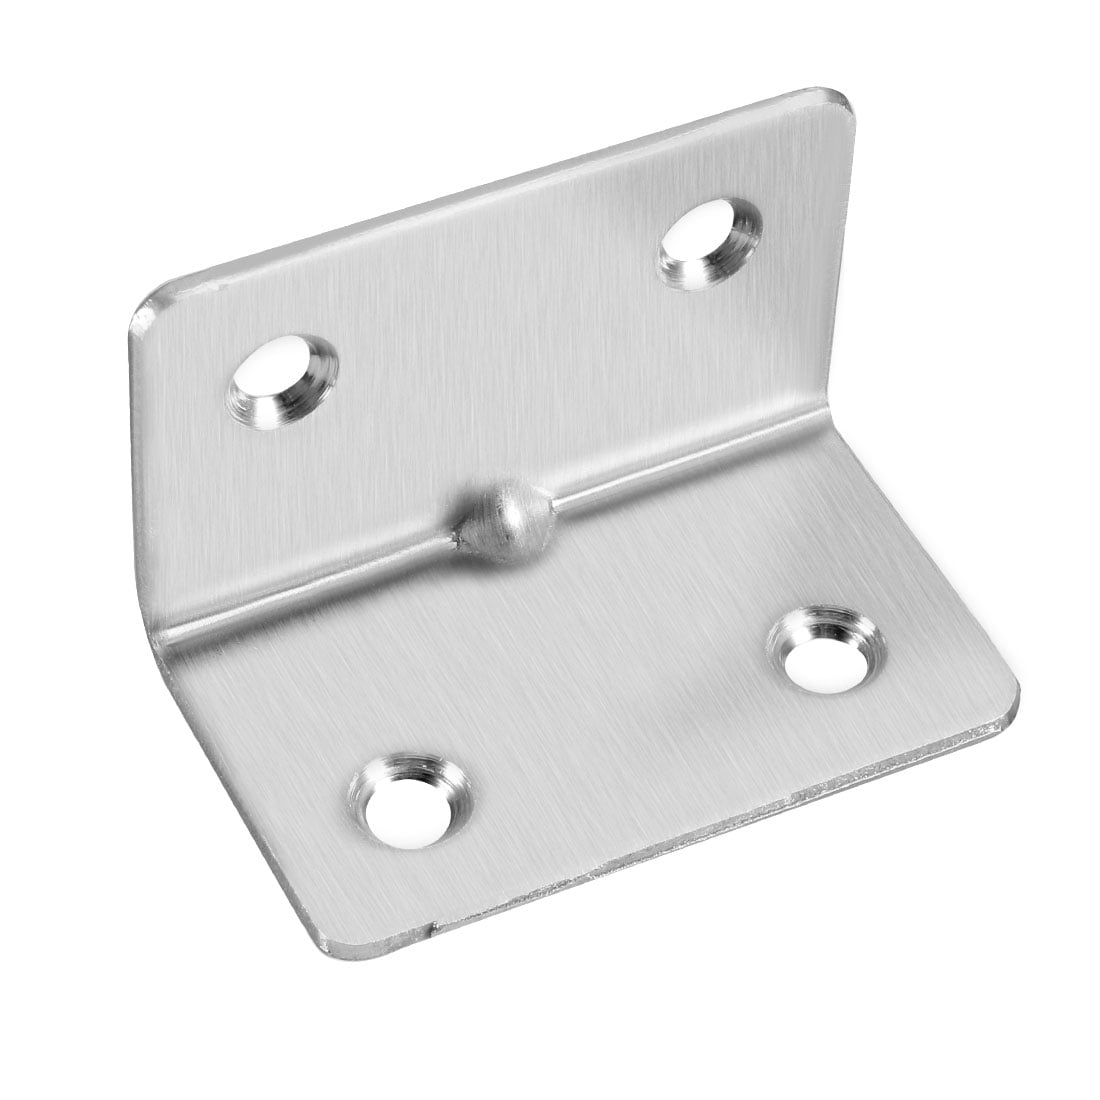 AD2 31mm x 31mm x 3mm A2 STAINLESS CORNER ANGLE BRACE BRACKETS DECKING 